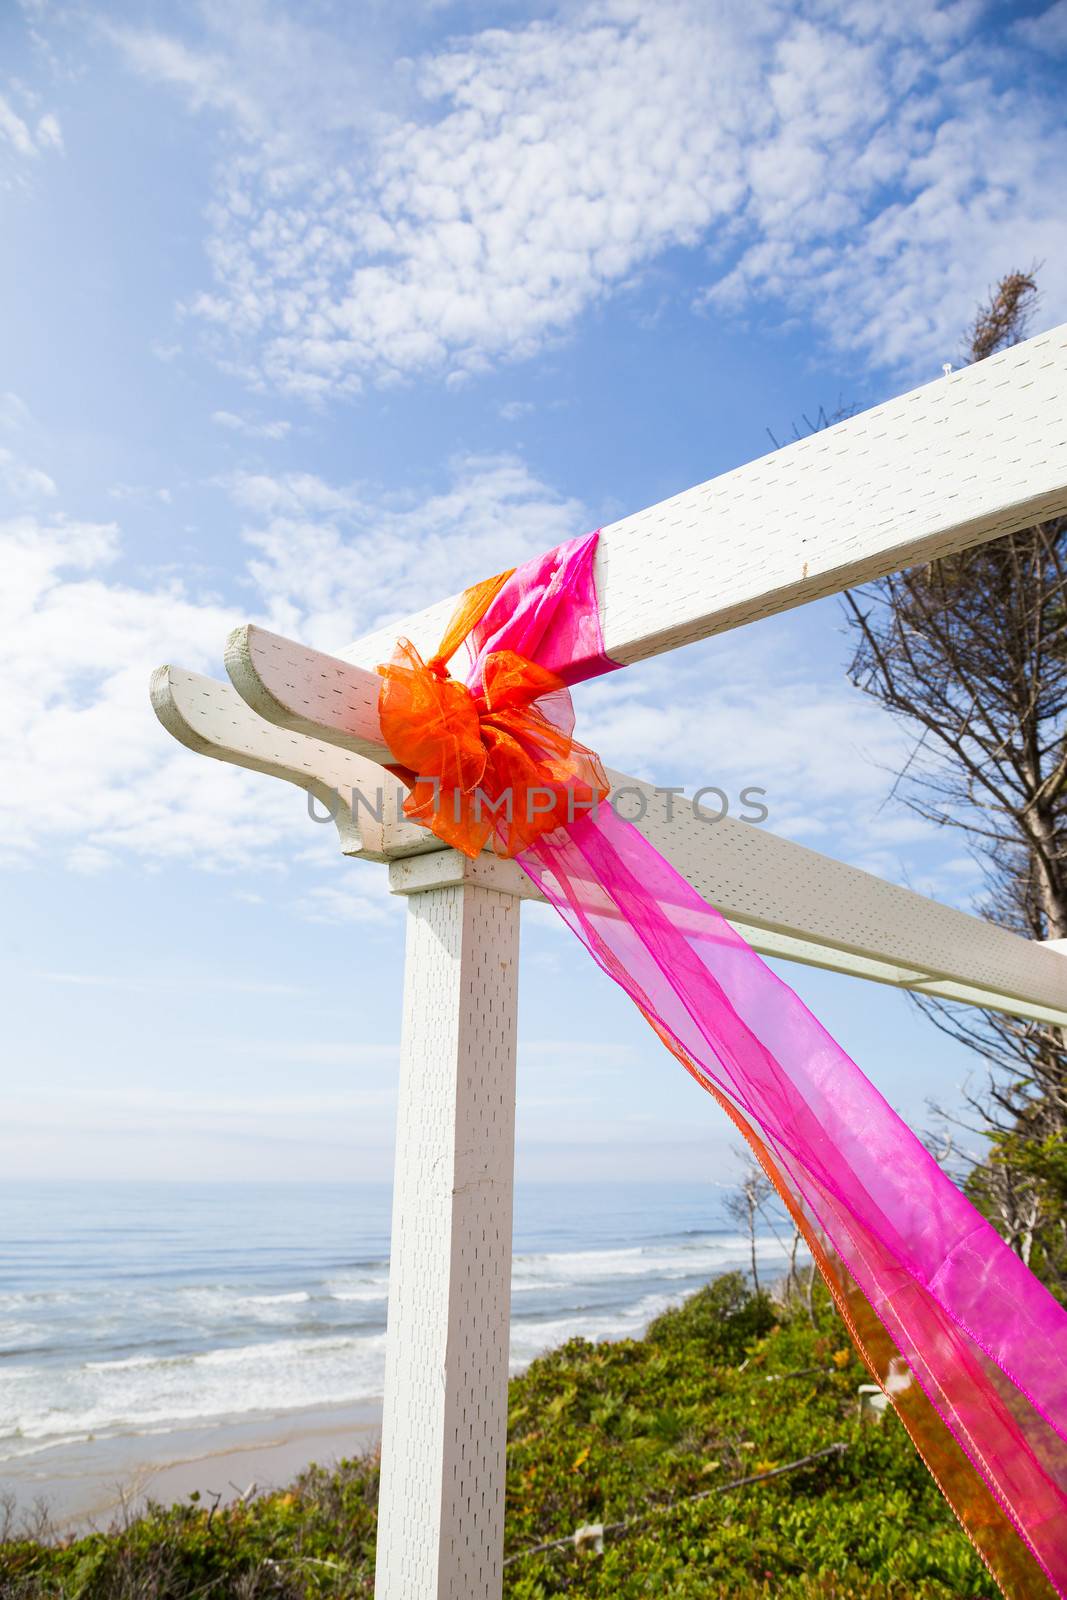 Bows and fabric are tied together to create decorations for this outdoor coastal summer wedding with vibrant colors.